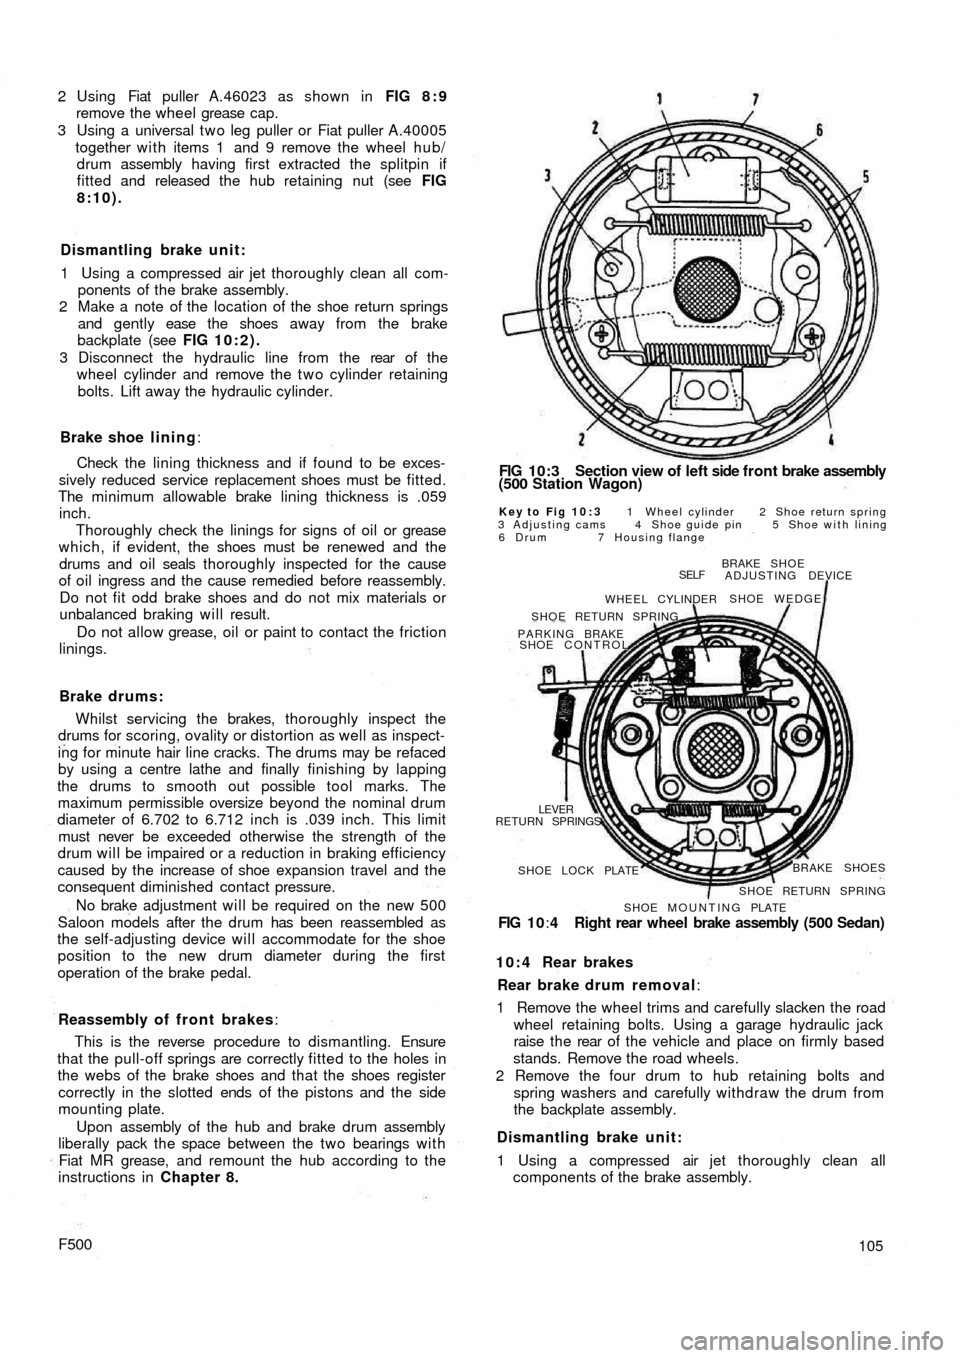 FIAT 500 1957 1.G Workshop Manual 2 Using  Fiat puller A.46023 as shown in FIG 8 : 9
remove the wheel grease cap.
3 Using a universal t w o leg puller or Fiat puller A.40005
together w i t h items 1  and 9 remove the wheel hub/
drum a